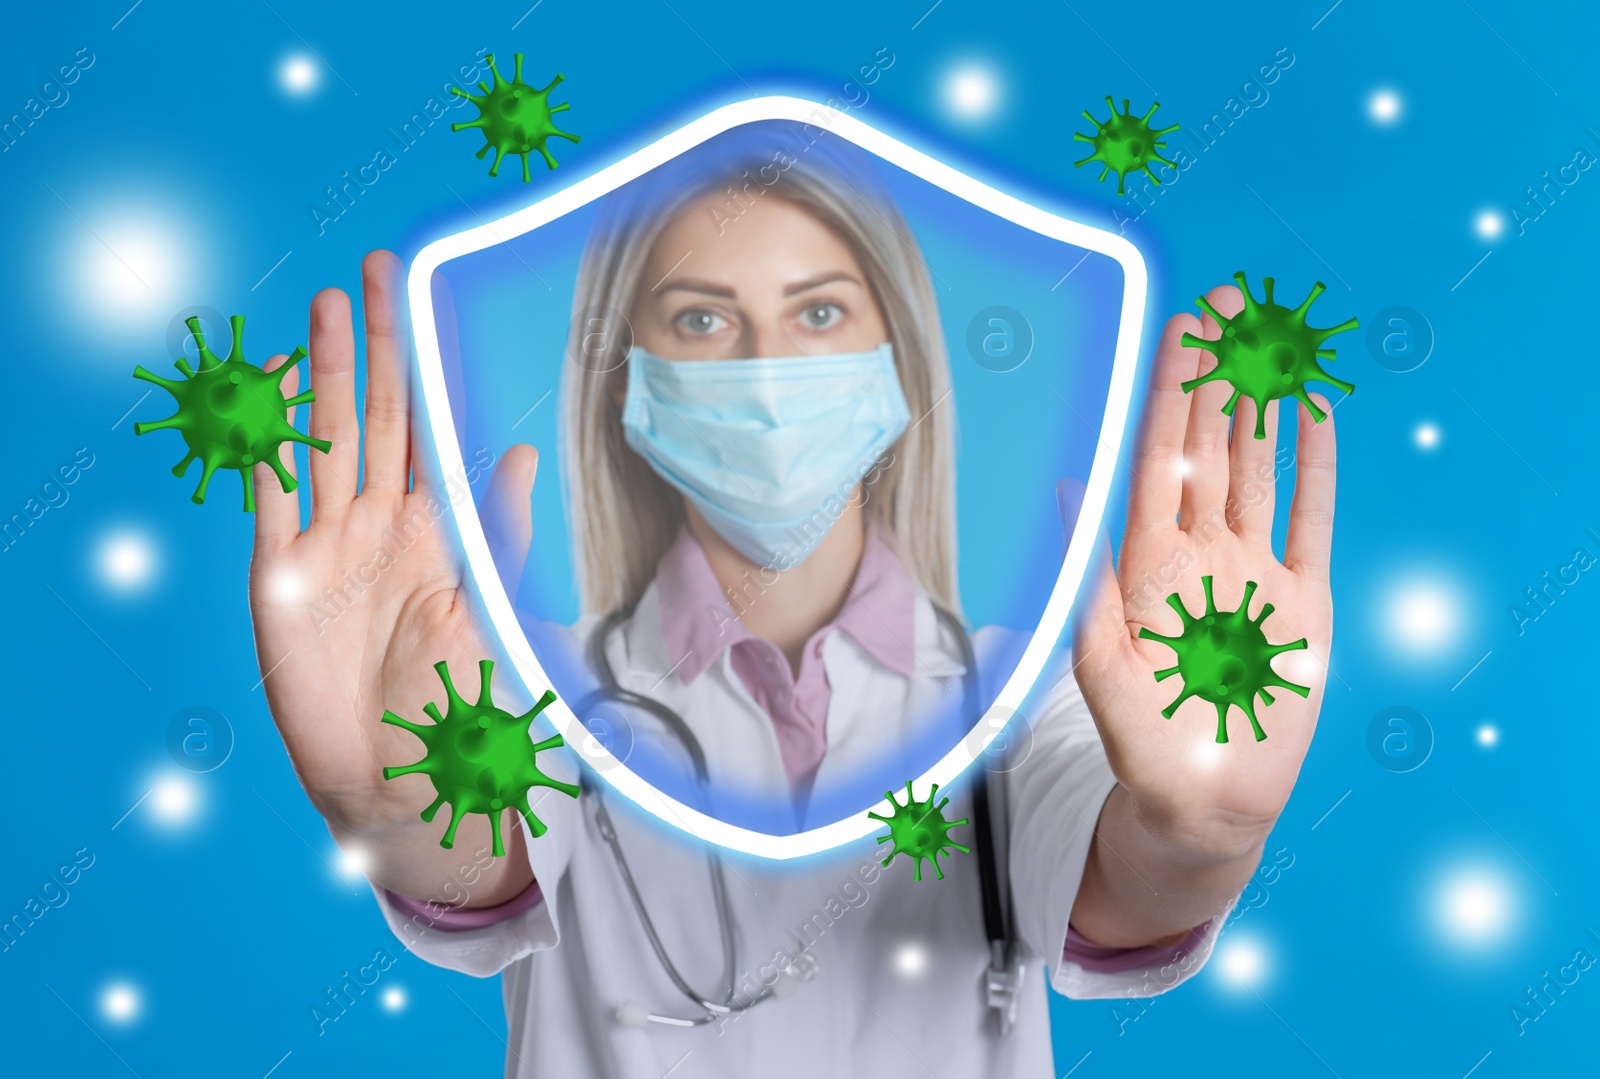 Image of Immunologist and shield with cross as symbol of virus protection on light blue background